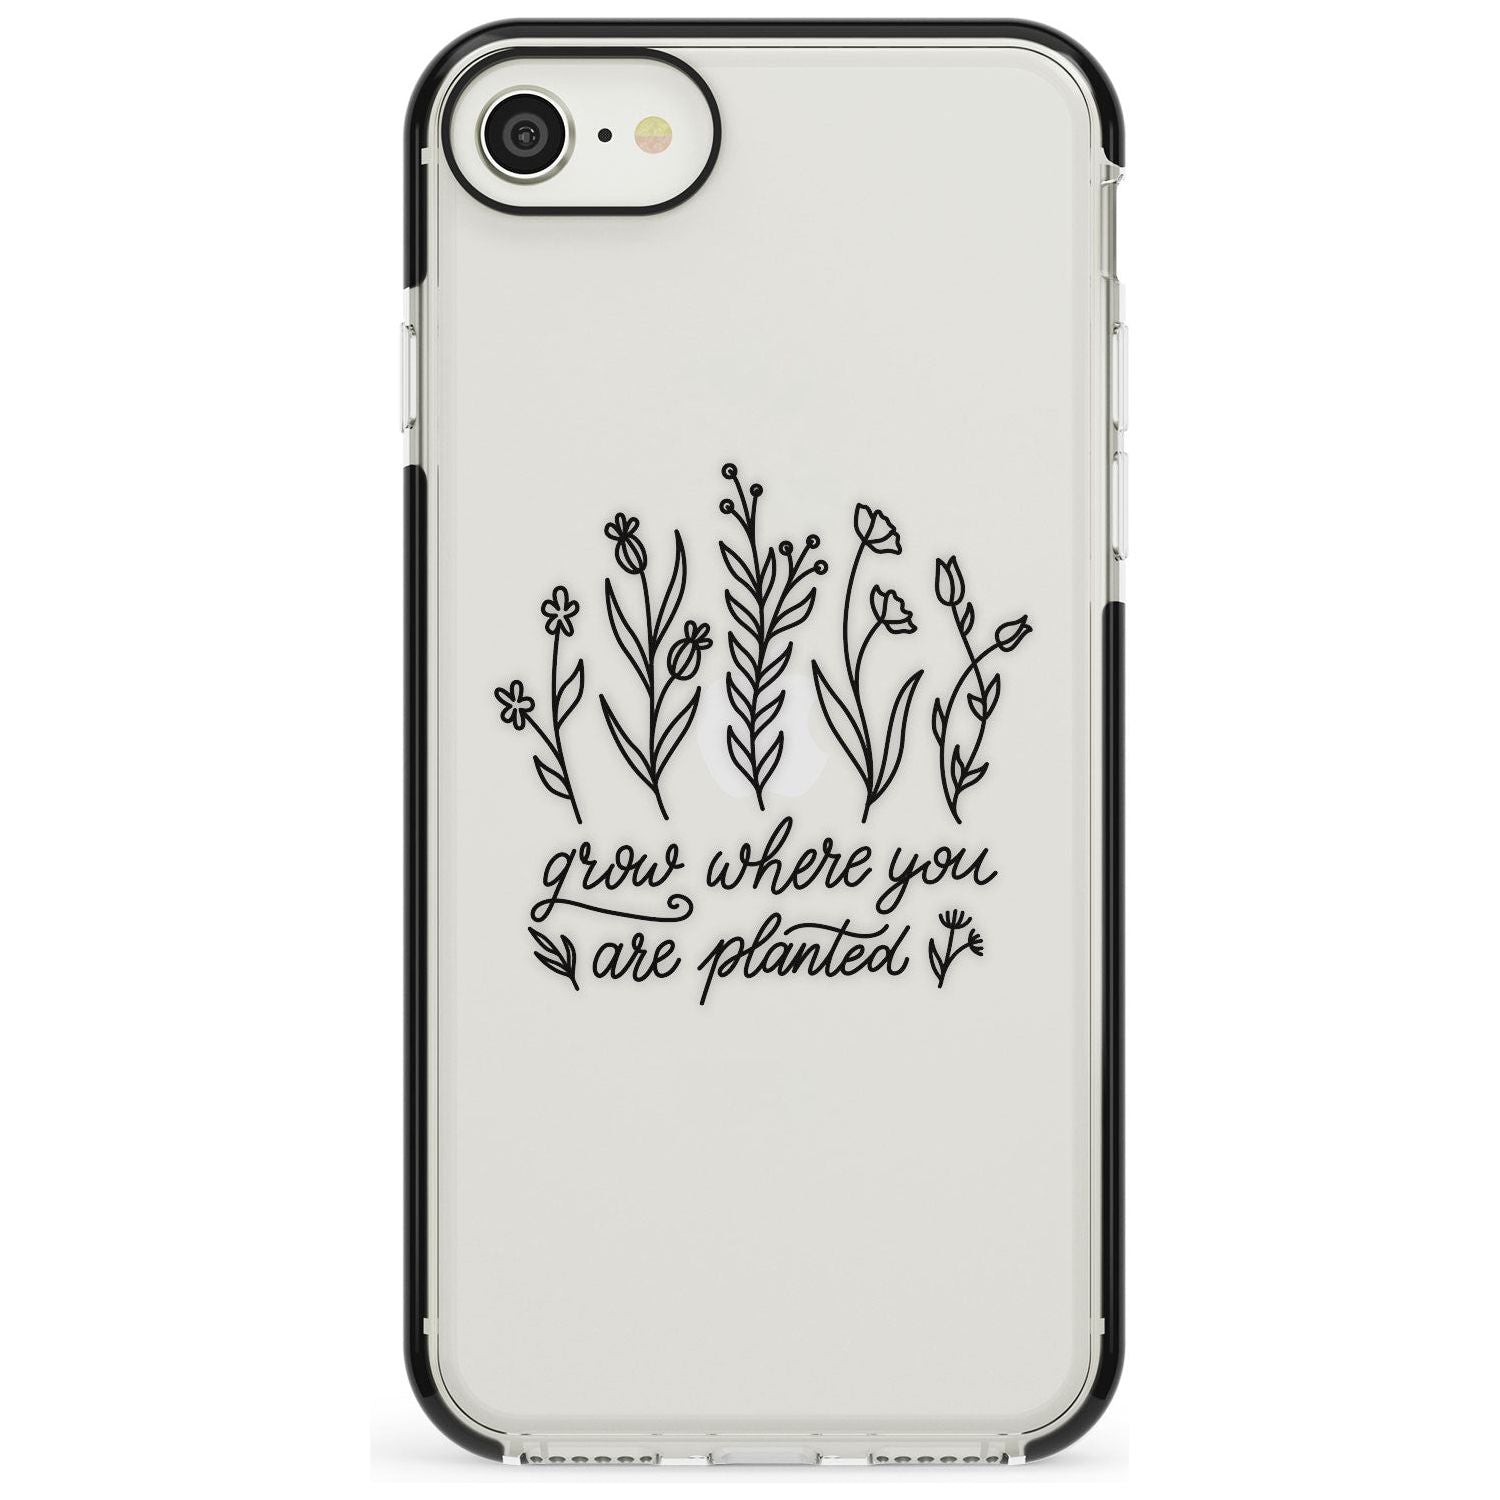 Grow where you are planted Black Impact Phone Case for iPhone SE 8 7 Plus